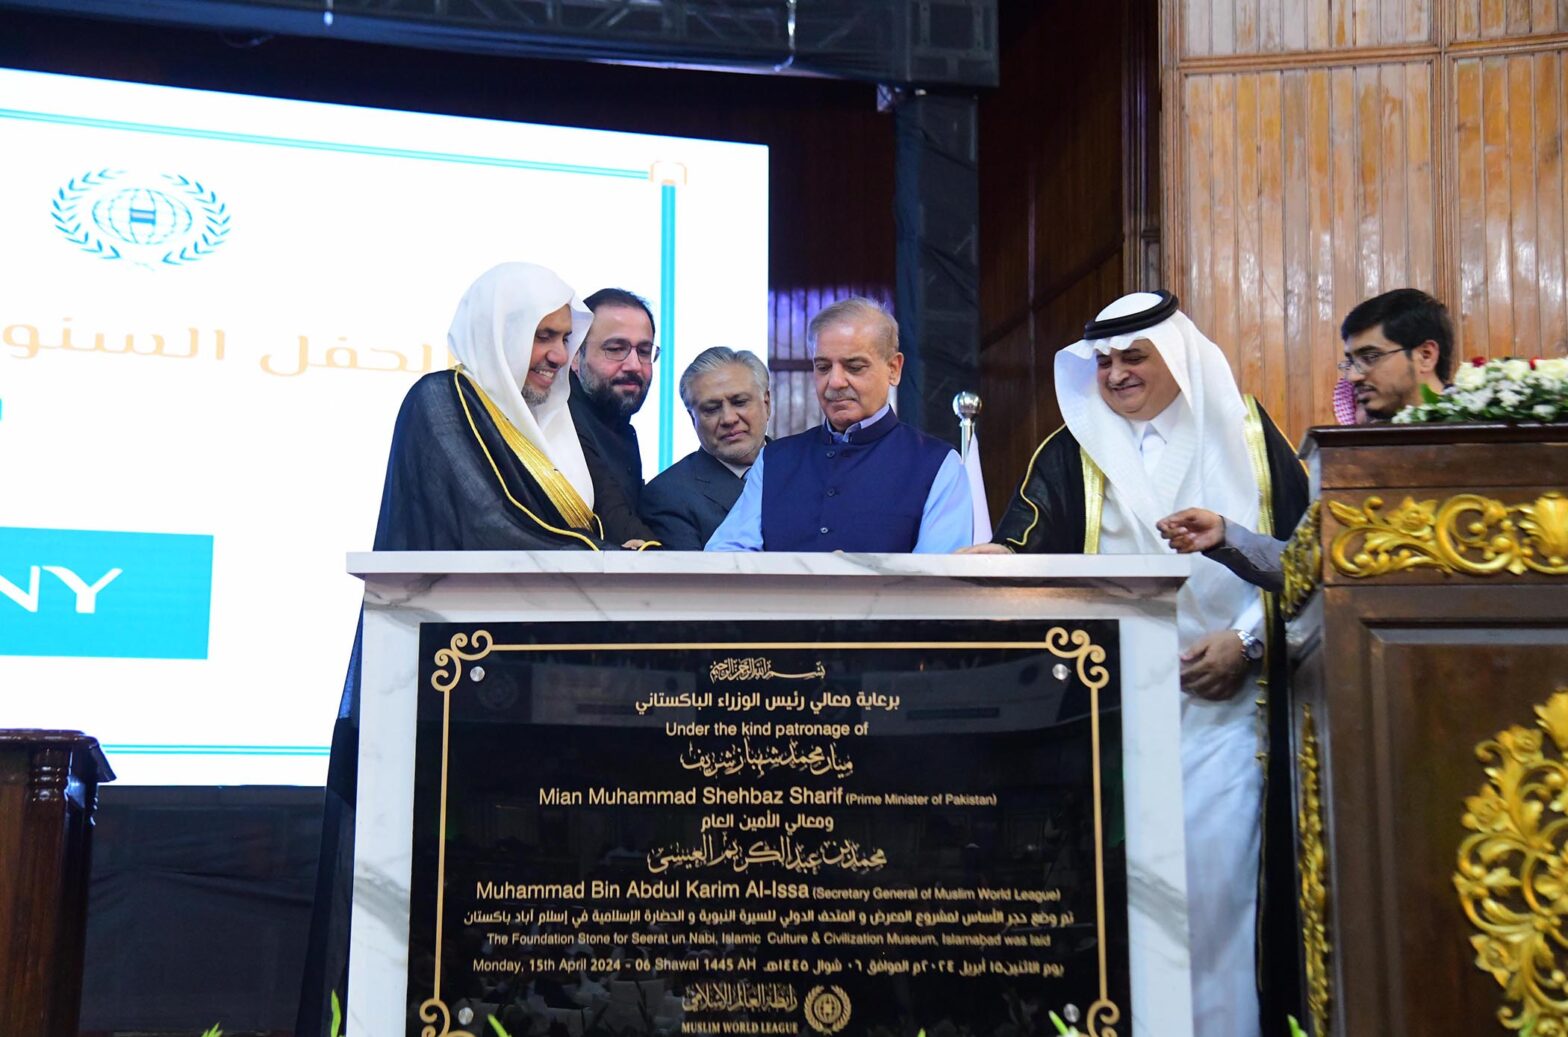 PM’s Arabic touch to speech at Seerat Museum event receives huge applause